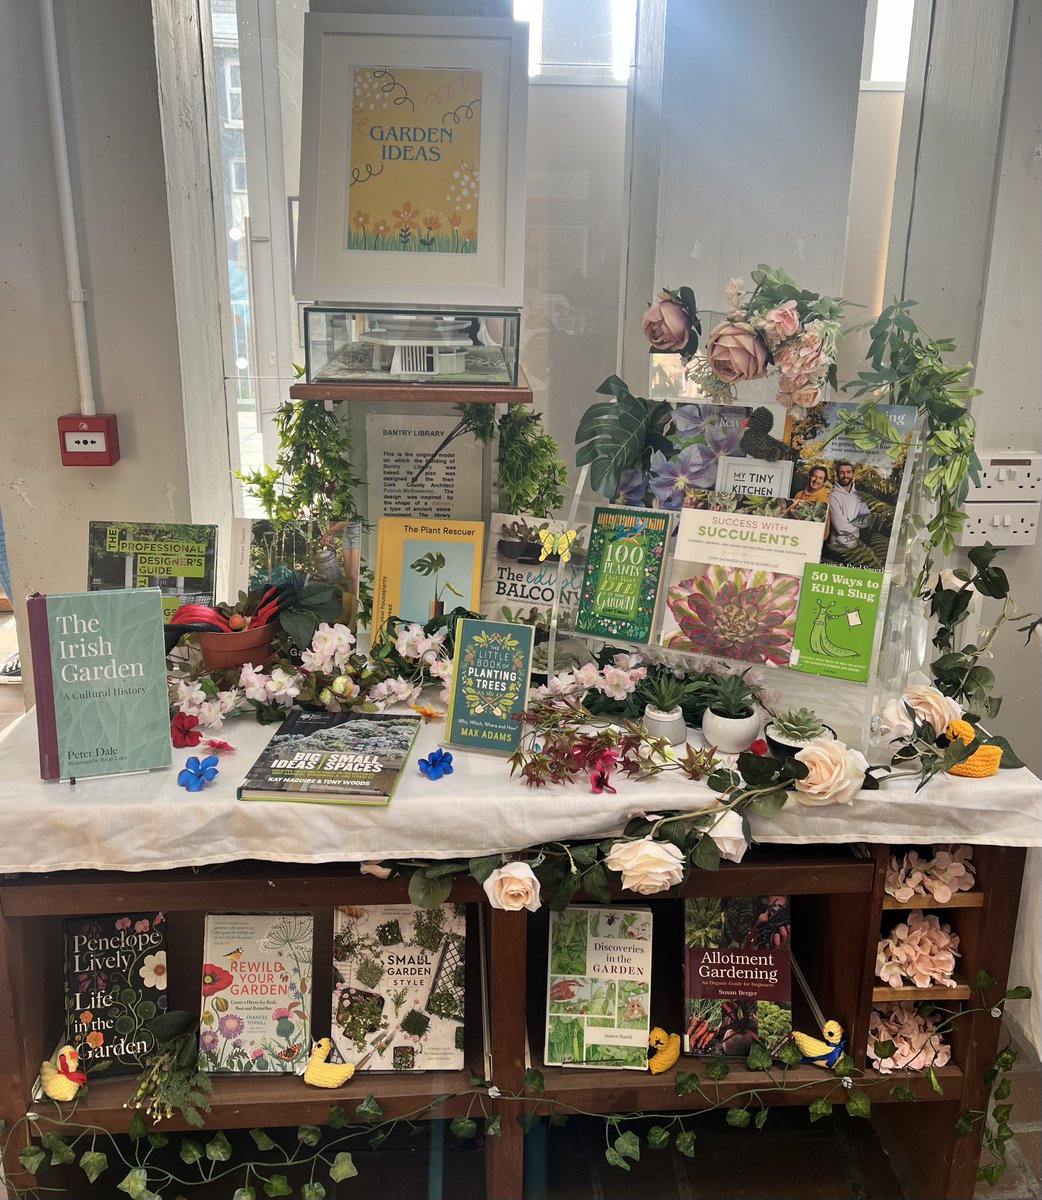 Now that the sun is finally making an appearance, get      inspired with all of our gardening books here in Bantry Library. #bantry #bantrynoticeboard
Relevant hashtags : #bantrylibrary